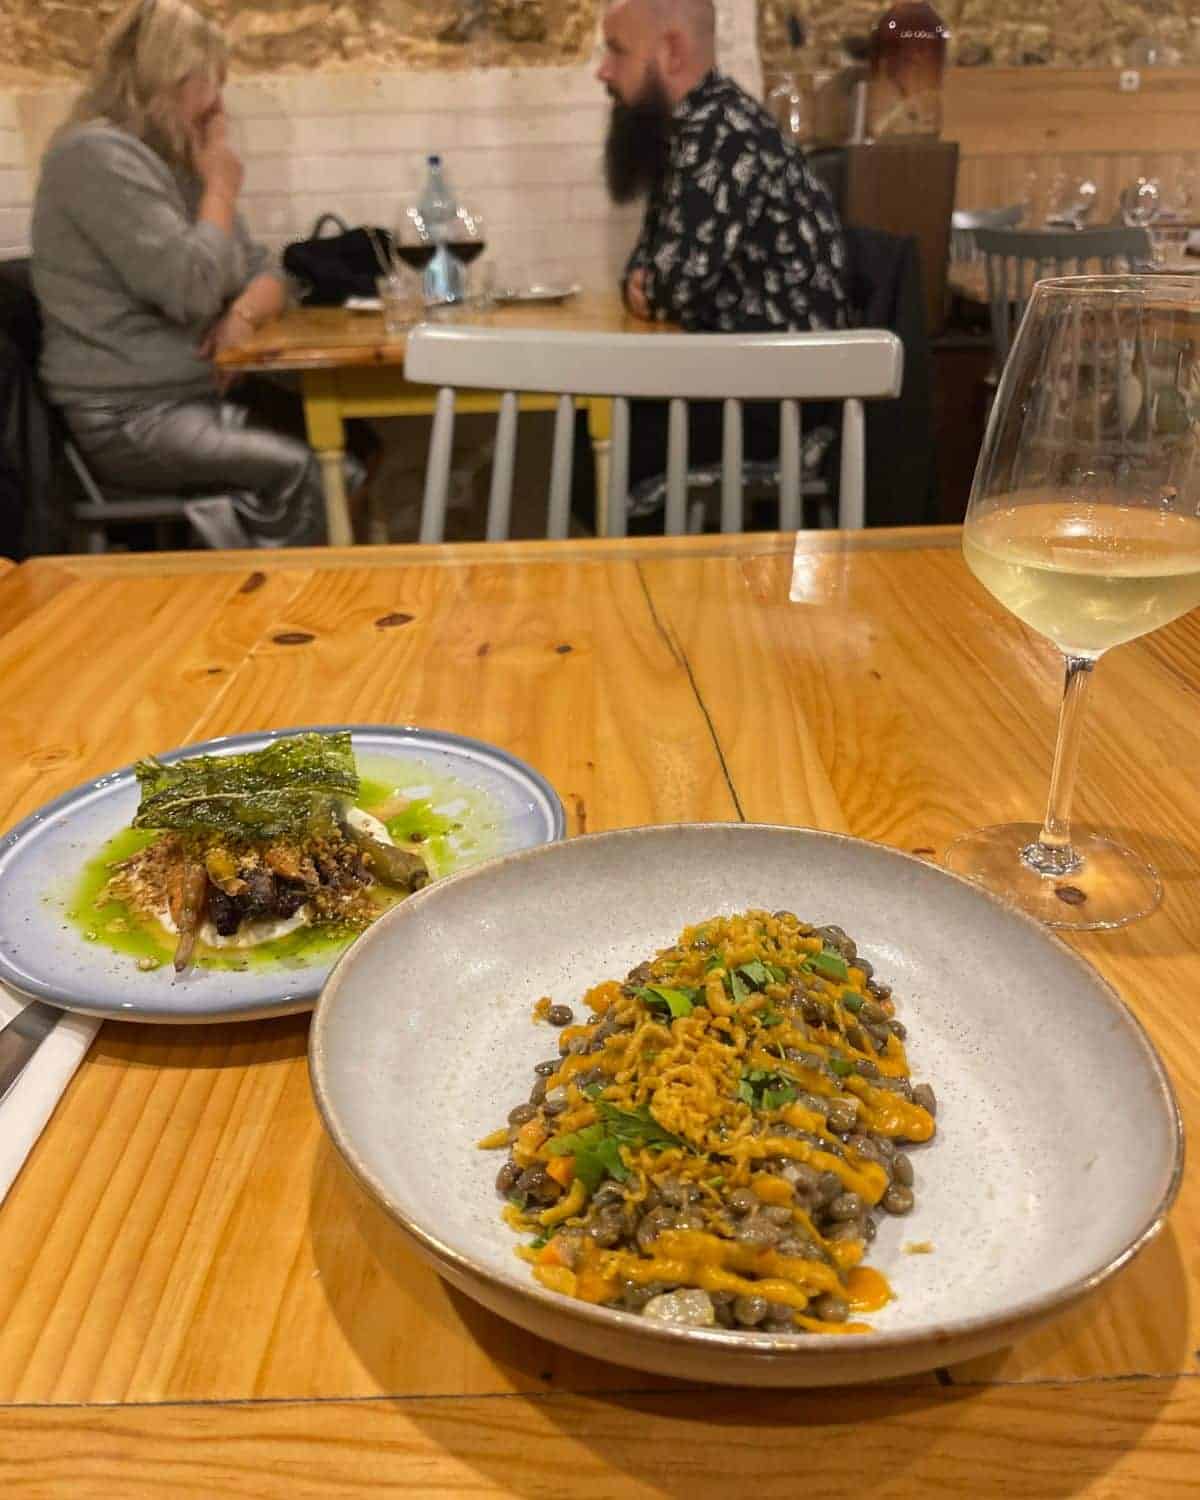 Image of a cozy restaurant interior with two plates of food in the foreground. The closest dish features a hearty, bean-based meal topped with crispy onions, and the other plate appears to have grilled fish on a bed of greens with a drizzle of sauce. In the background, a couple is engaged in conversation at their table. A glass of white wine is positioned to the right, complementing the dining experience.